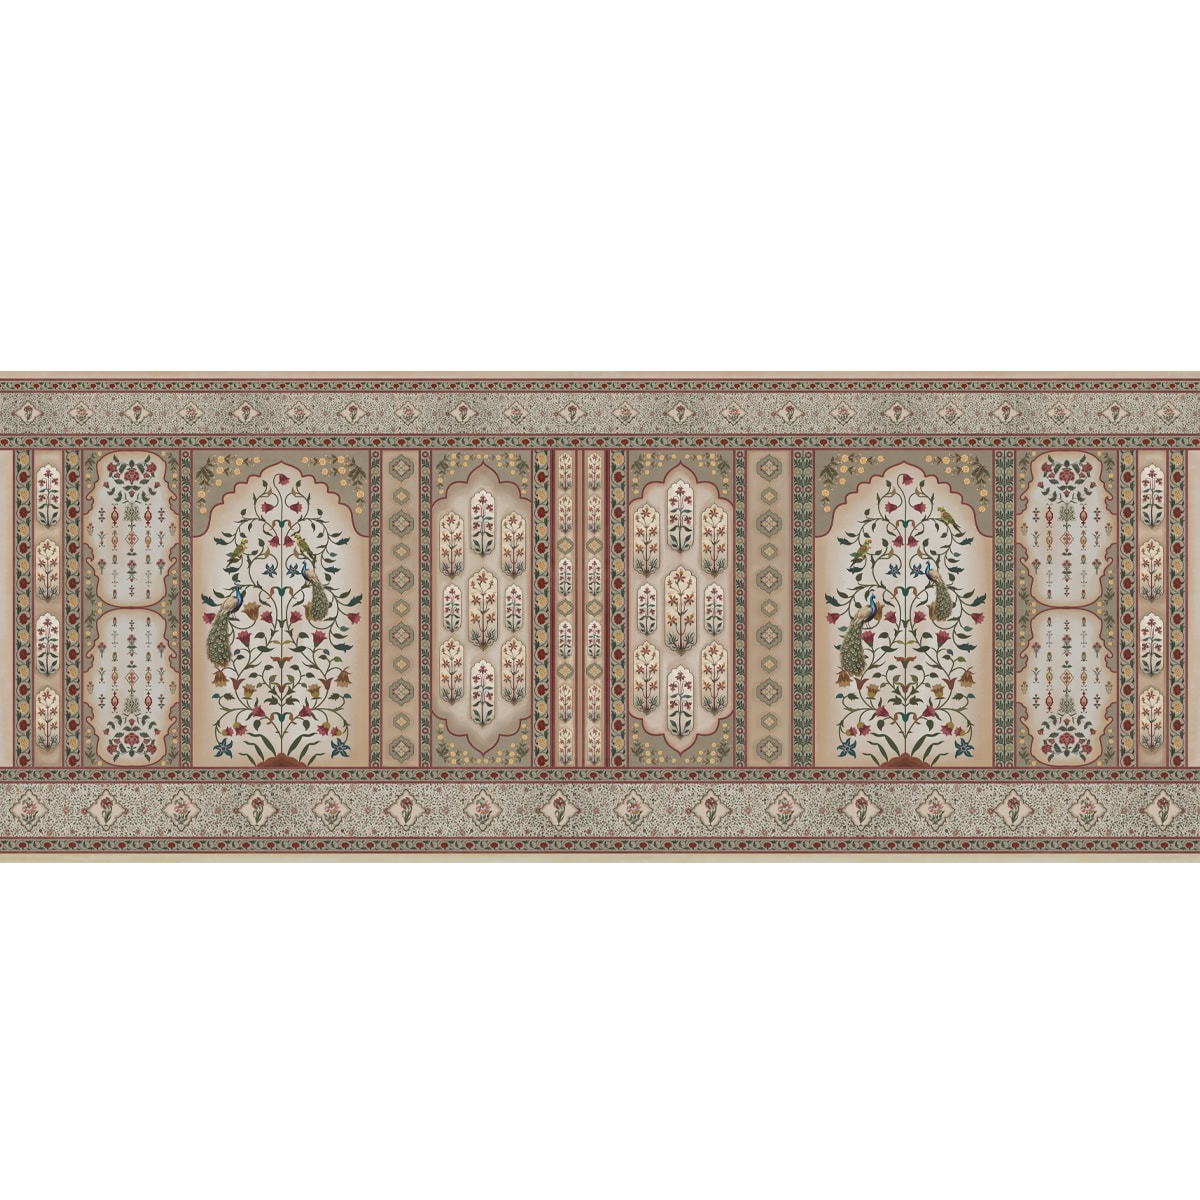 Mdhuban Indian Floral Jharoka Wallpaper in Suneherii Collection in Green Buy Now 